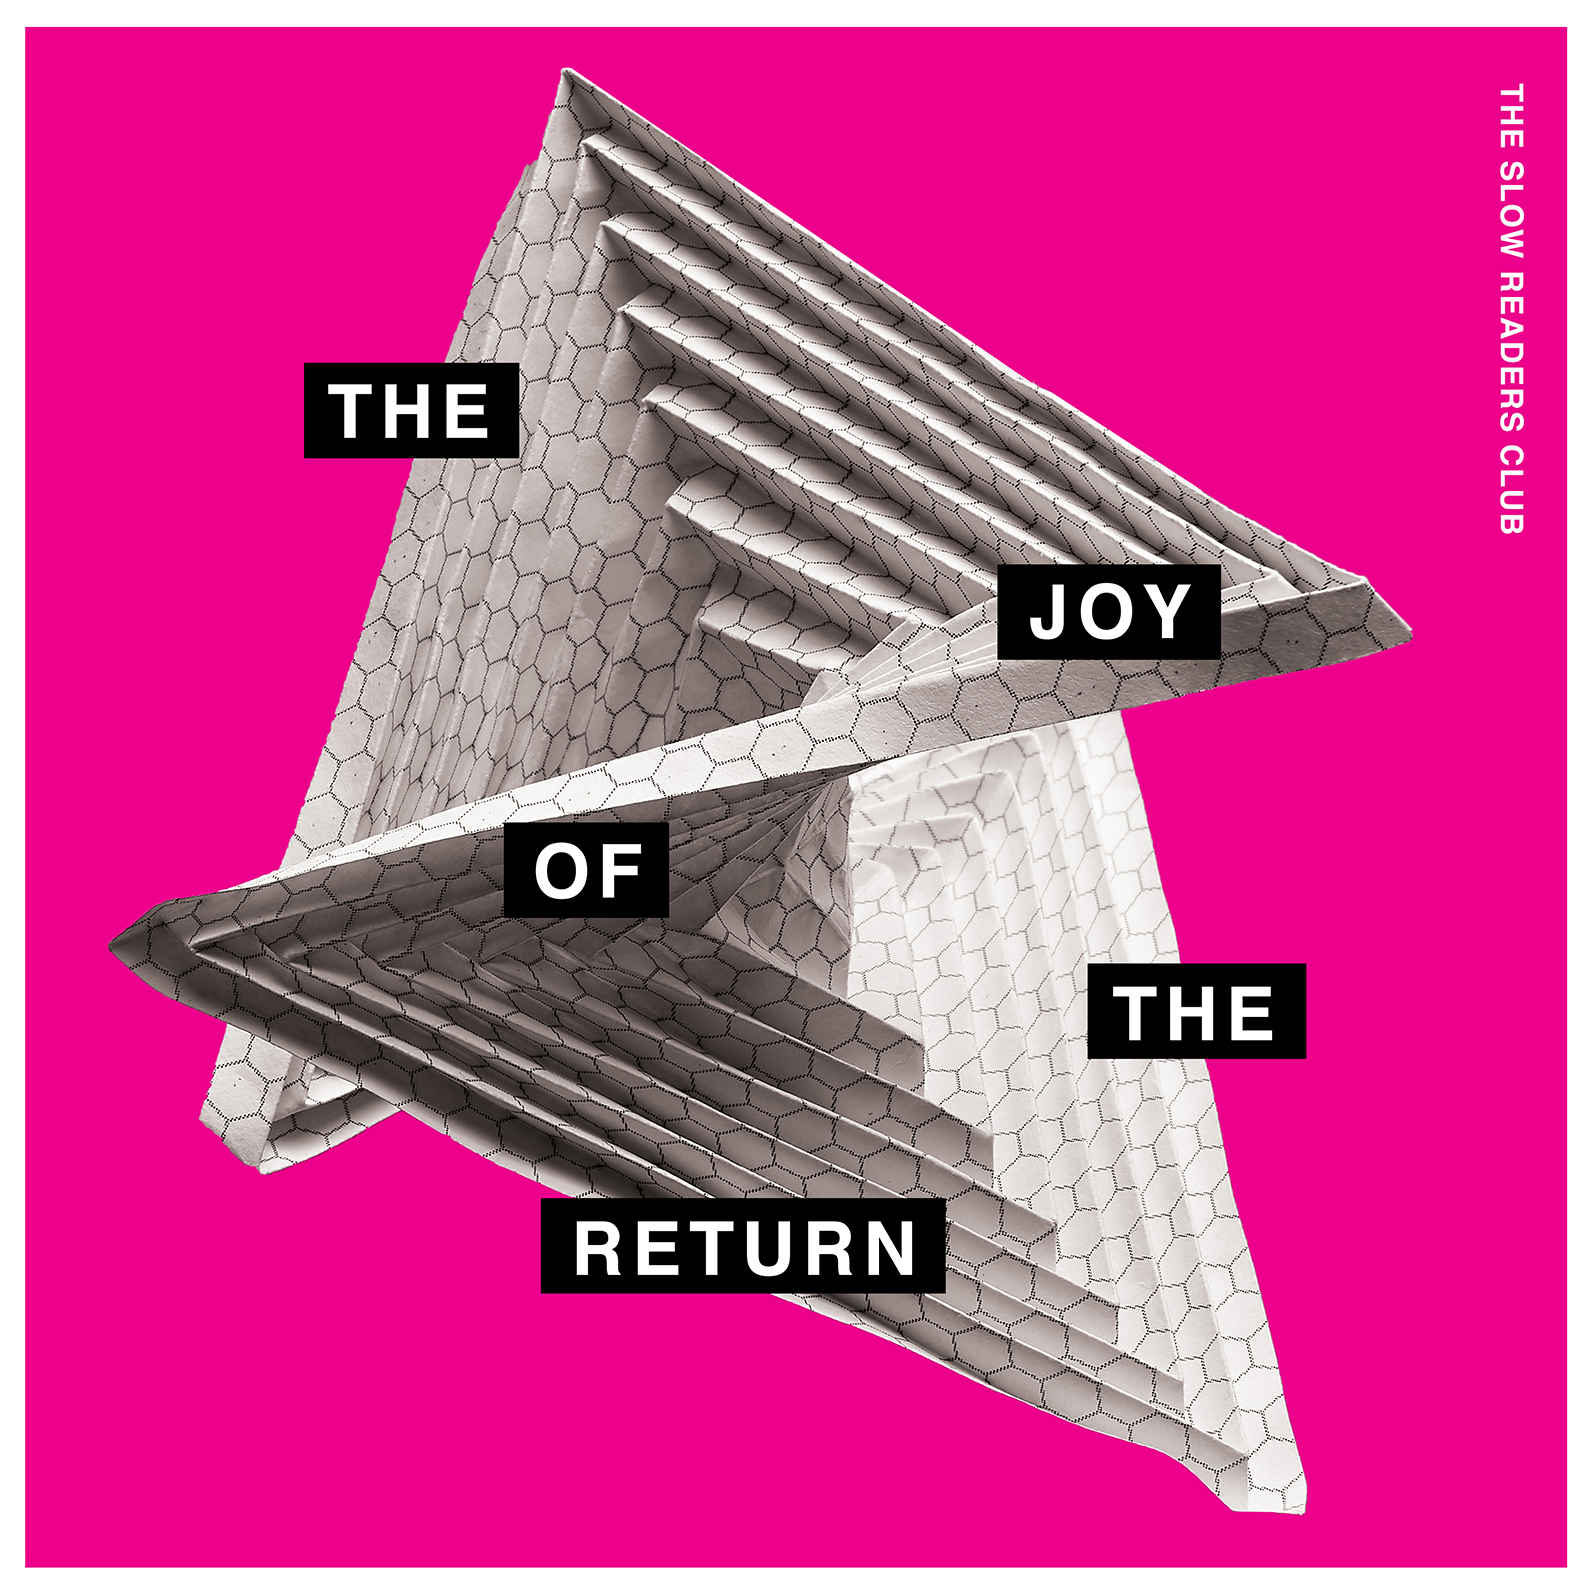 ALBUM REVIEW: The Slow Readers Club - The Joy Of The Return 